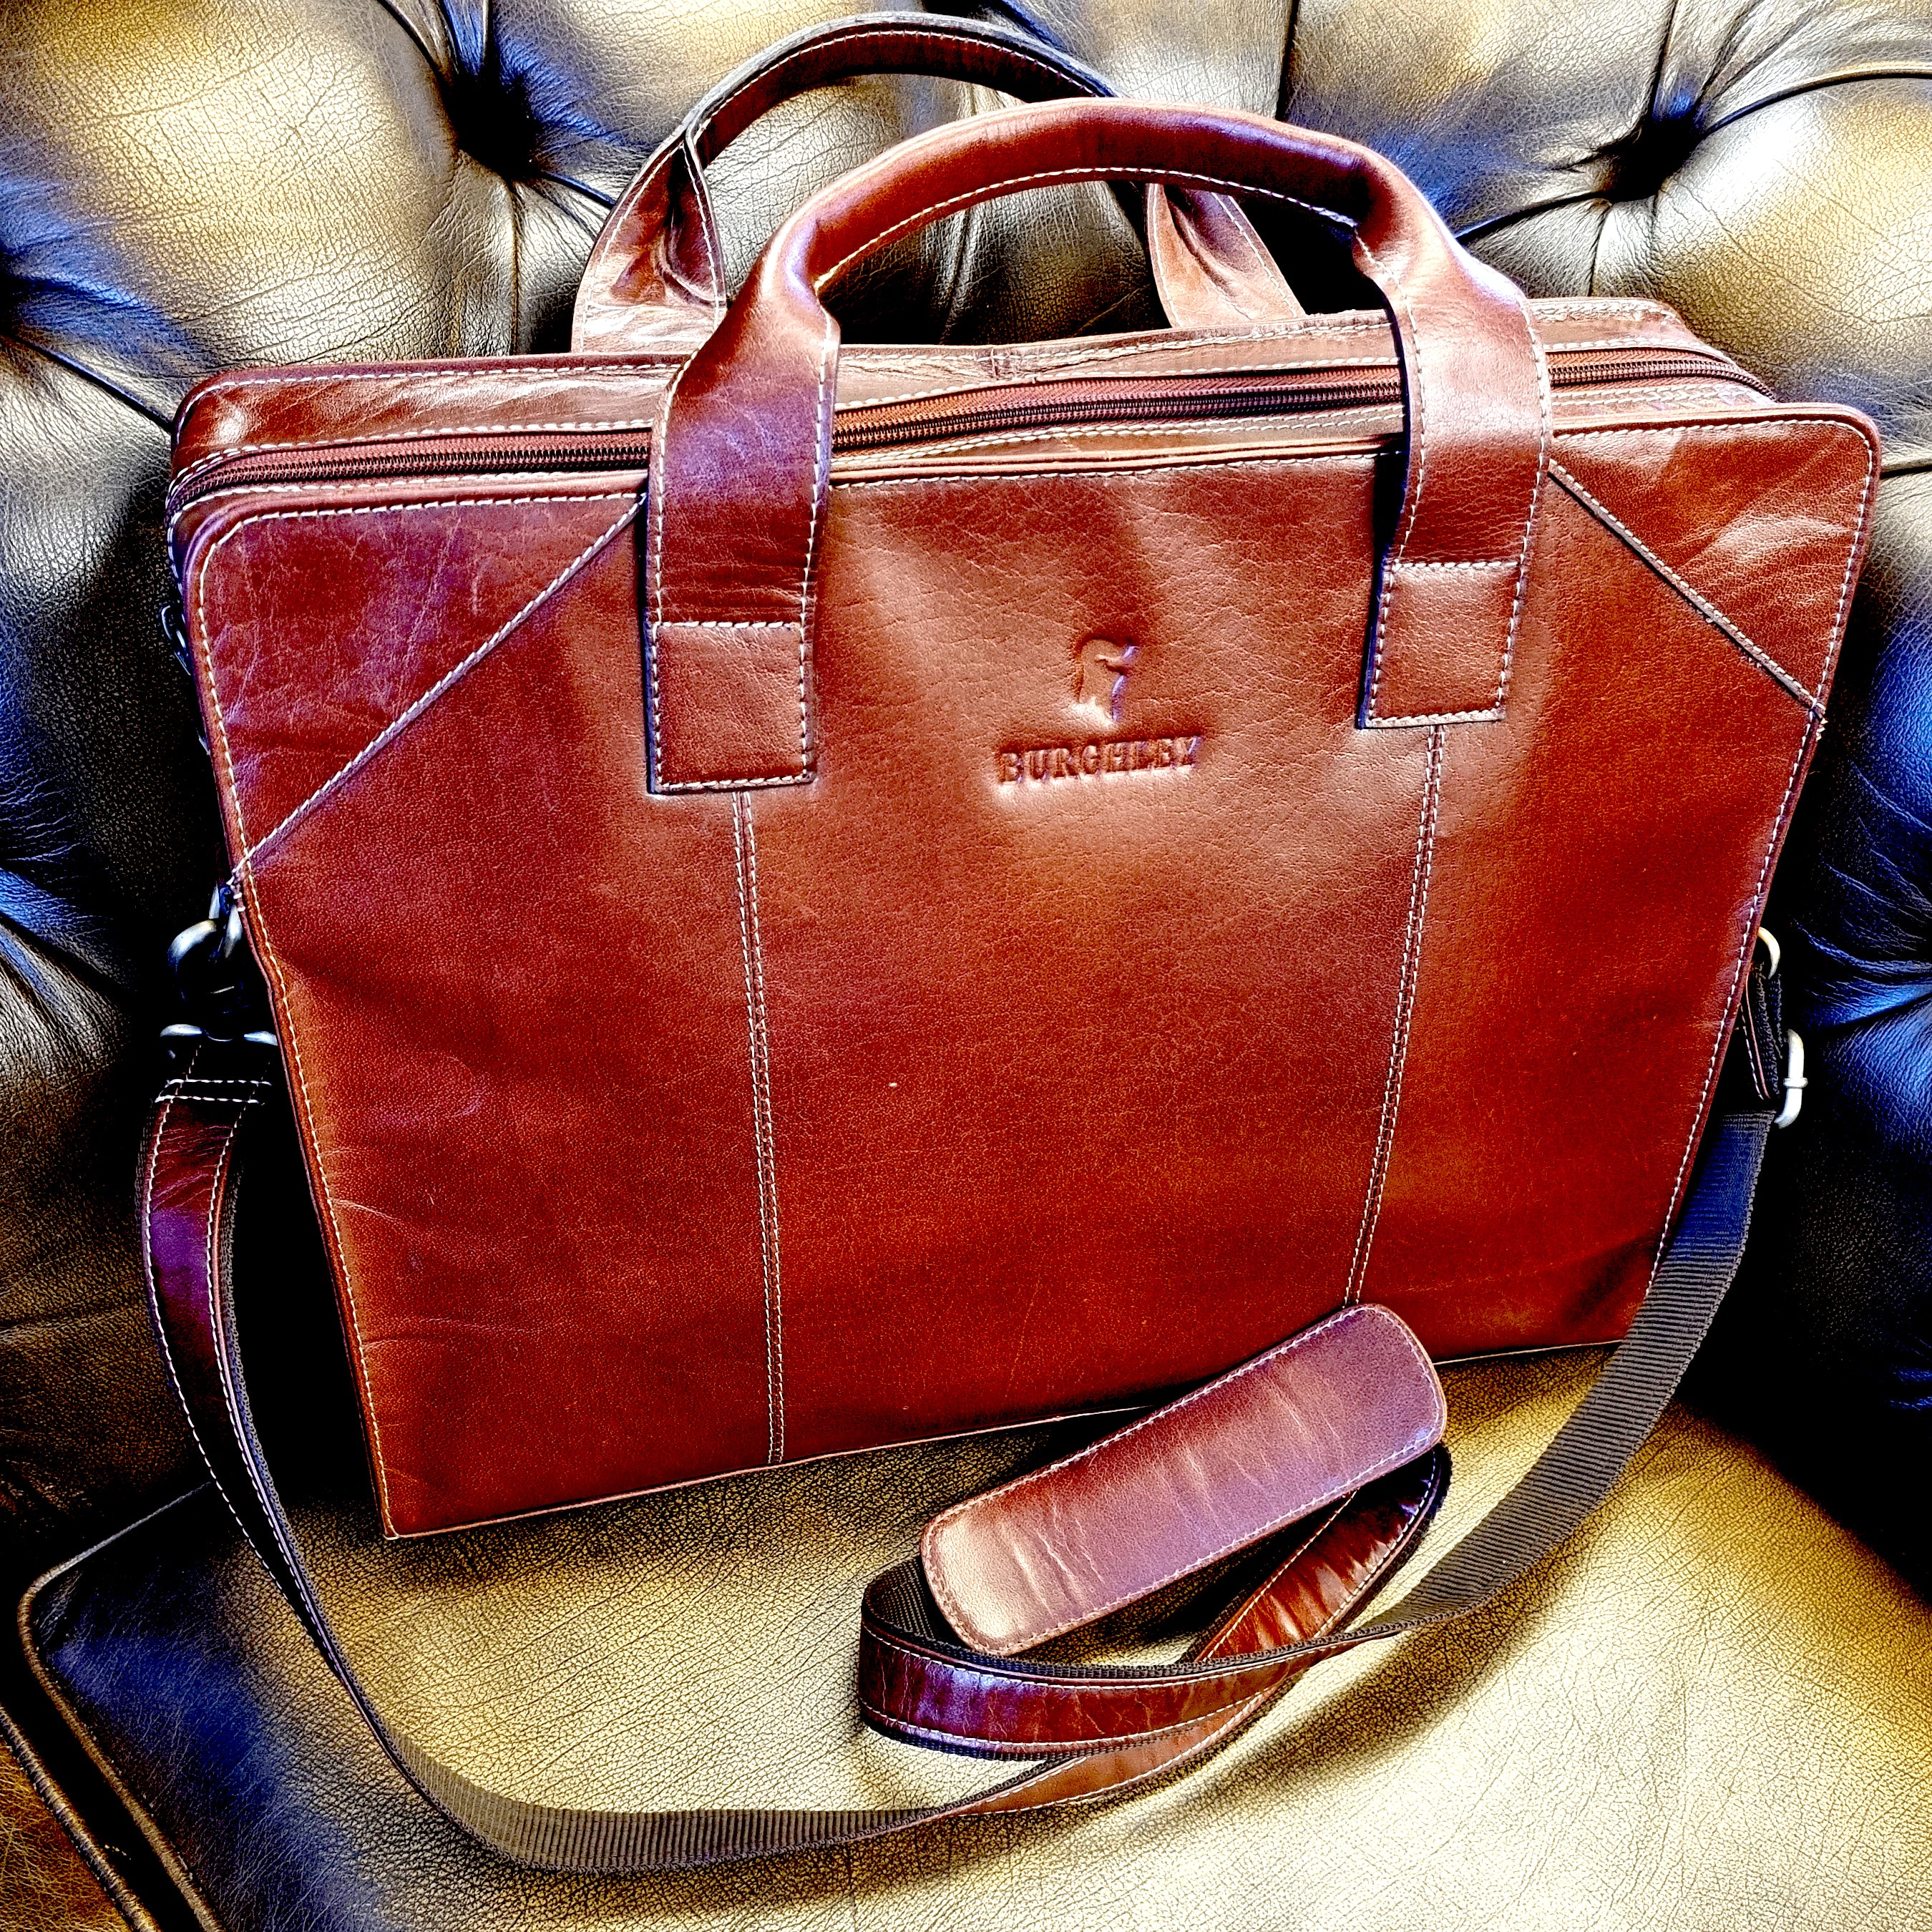 Magnificent Handmade Leather Laptop Bags With Personalisation Too – Vida  Vida Leather Bags & Accessories